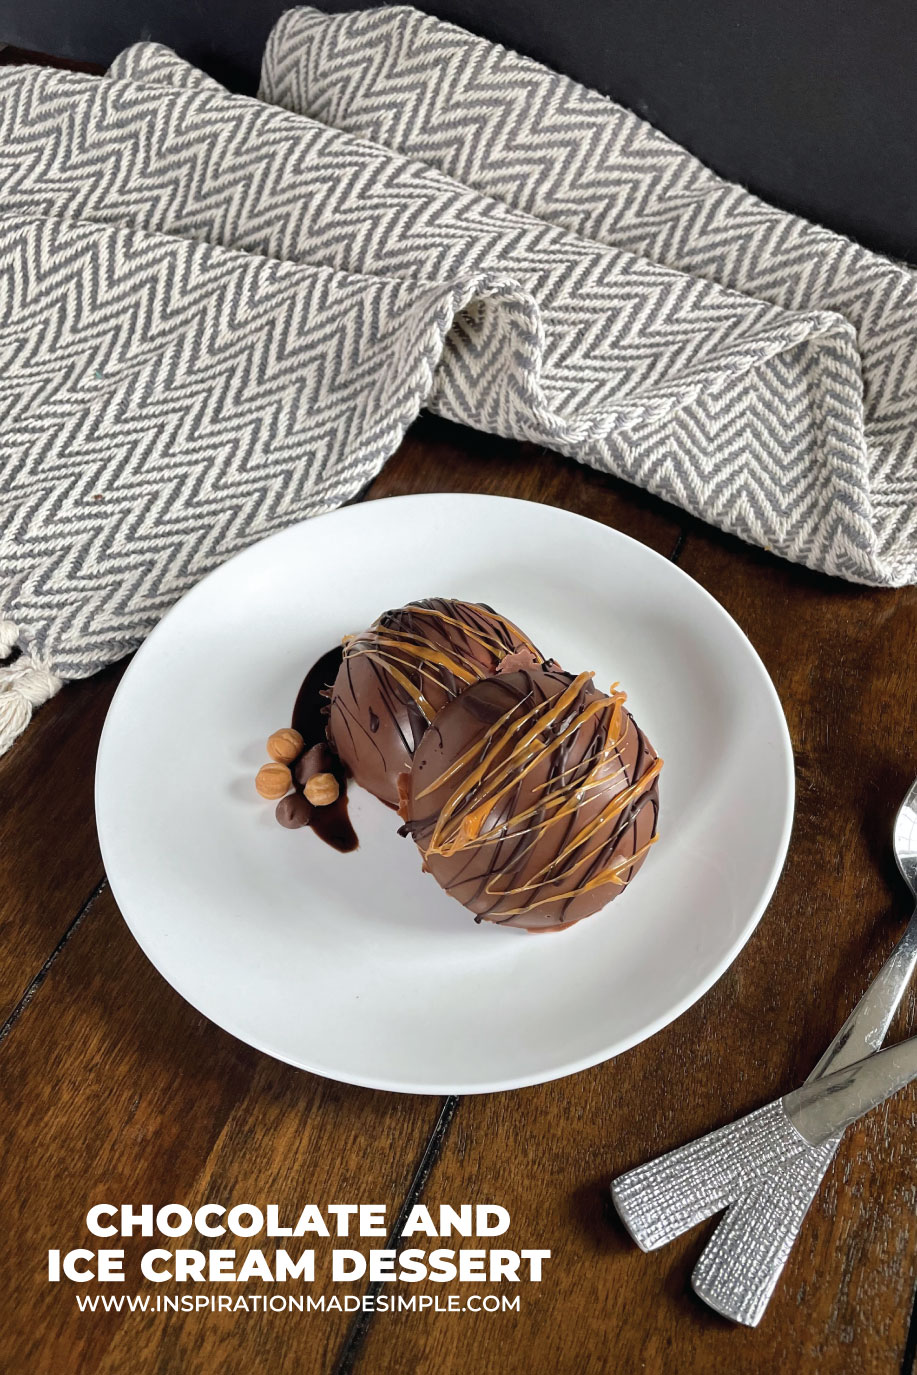 Use those hot cocoa bomb molds to make these Chocolate and Ice Cream Desserts!